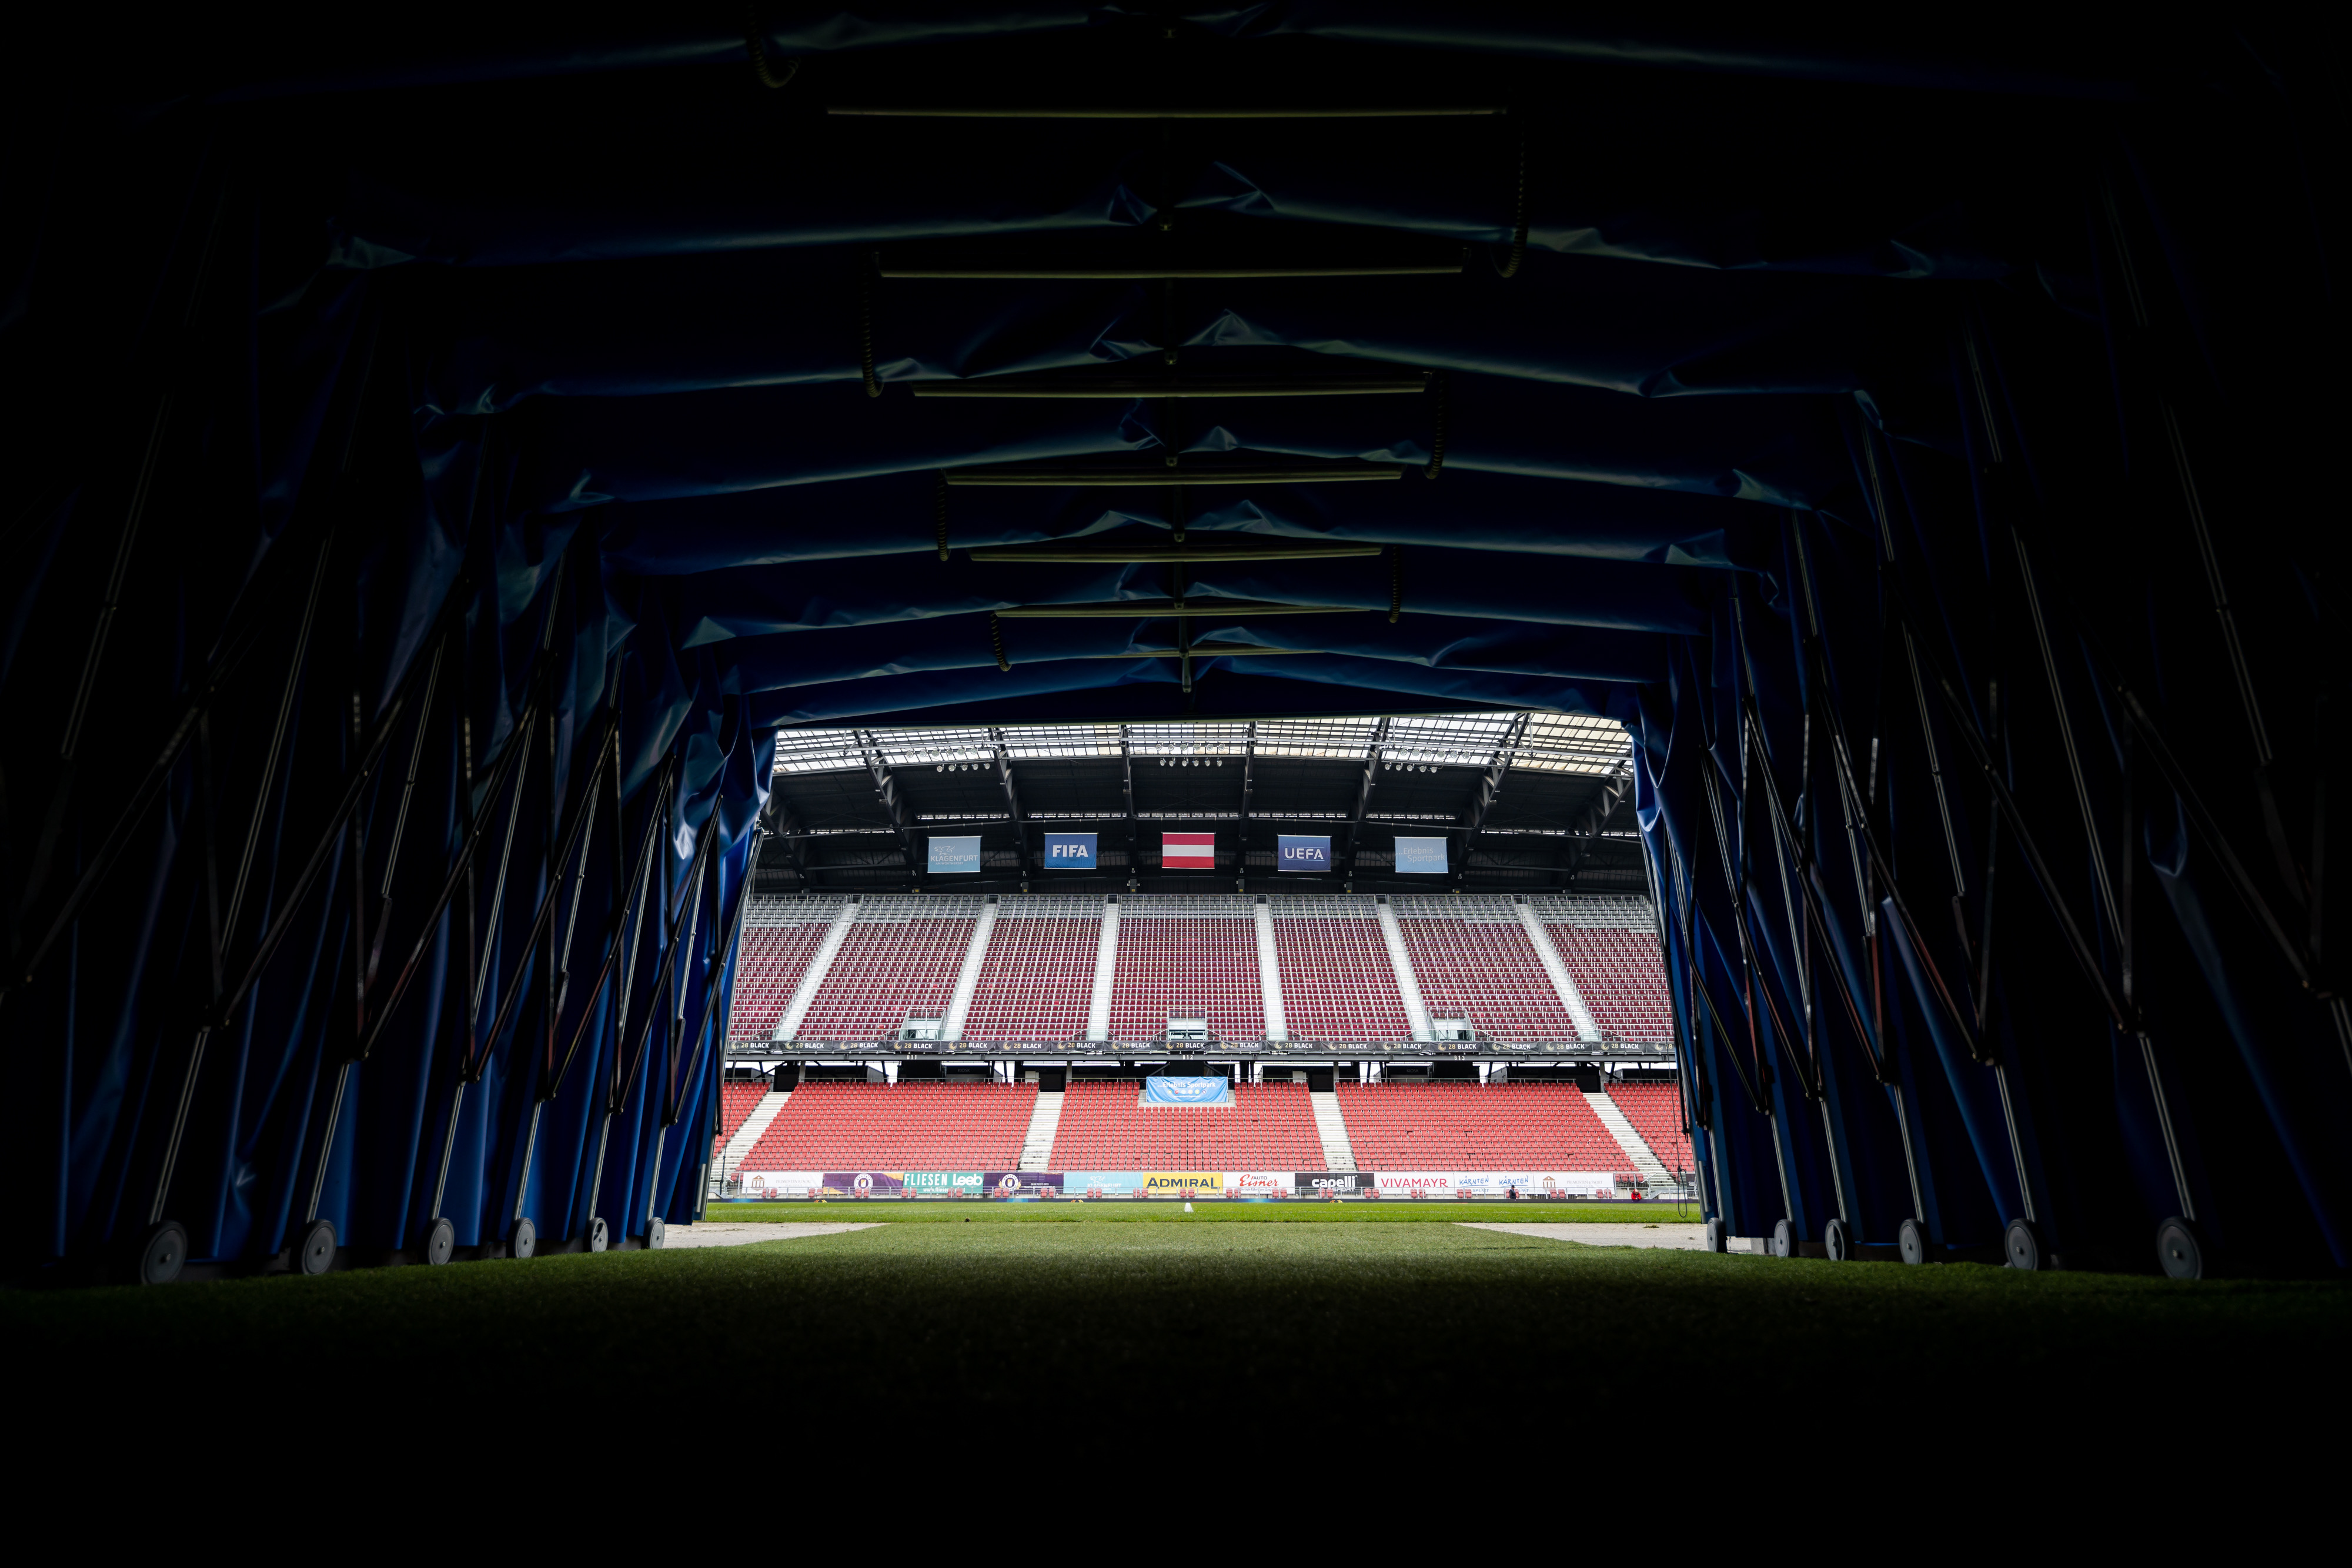 View from the players' tunnel at the Wörthersee Stadion in Klagenfurt.